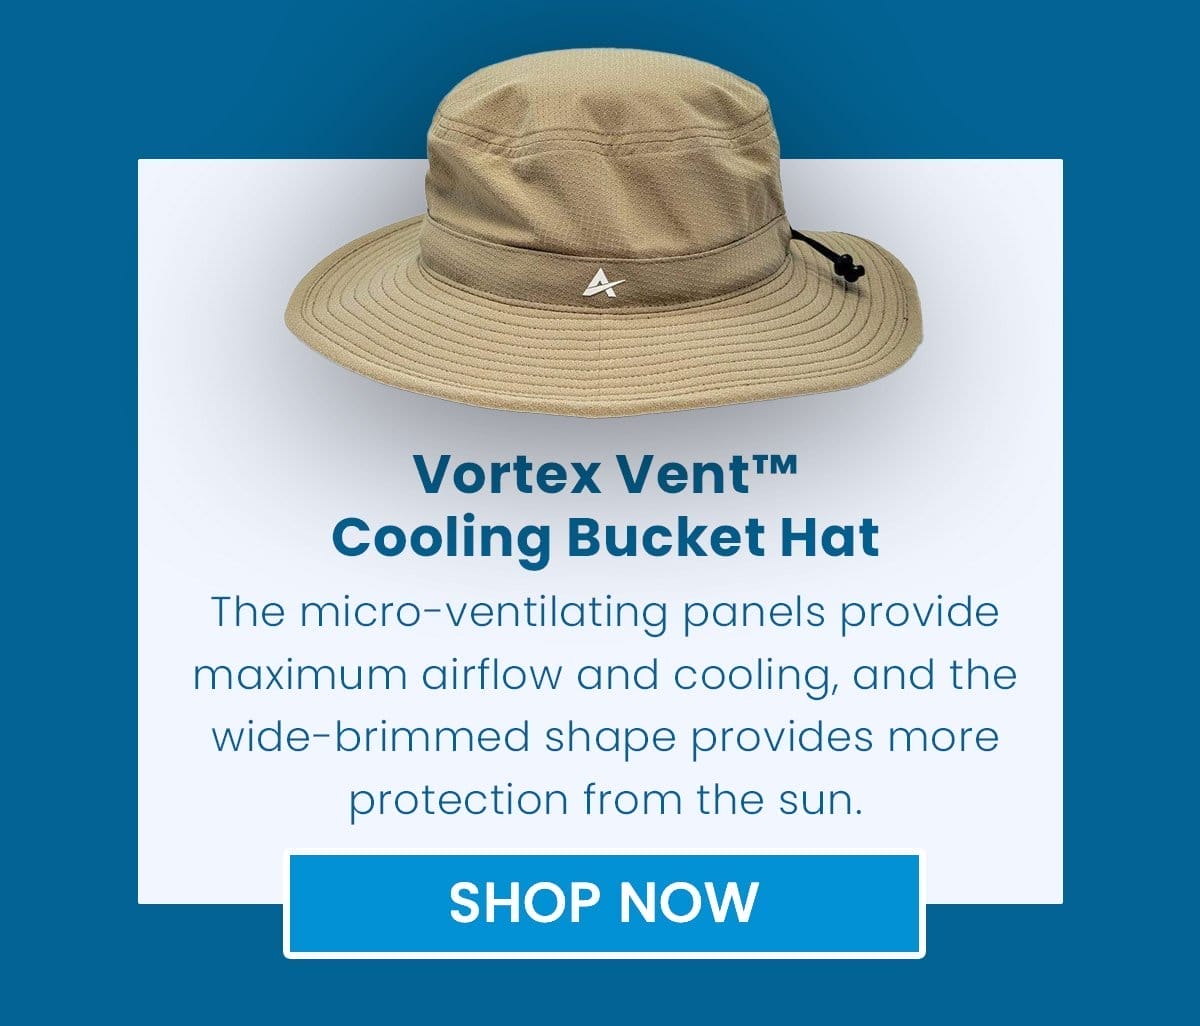 Cooling Bucket Hat